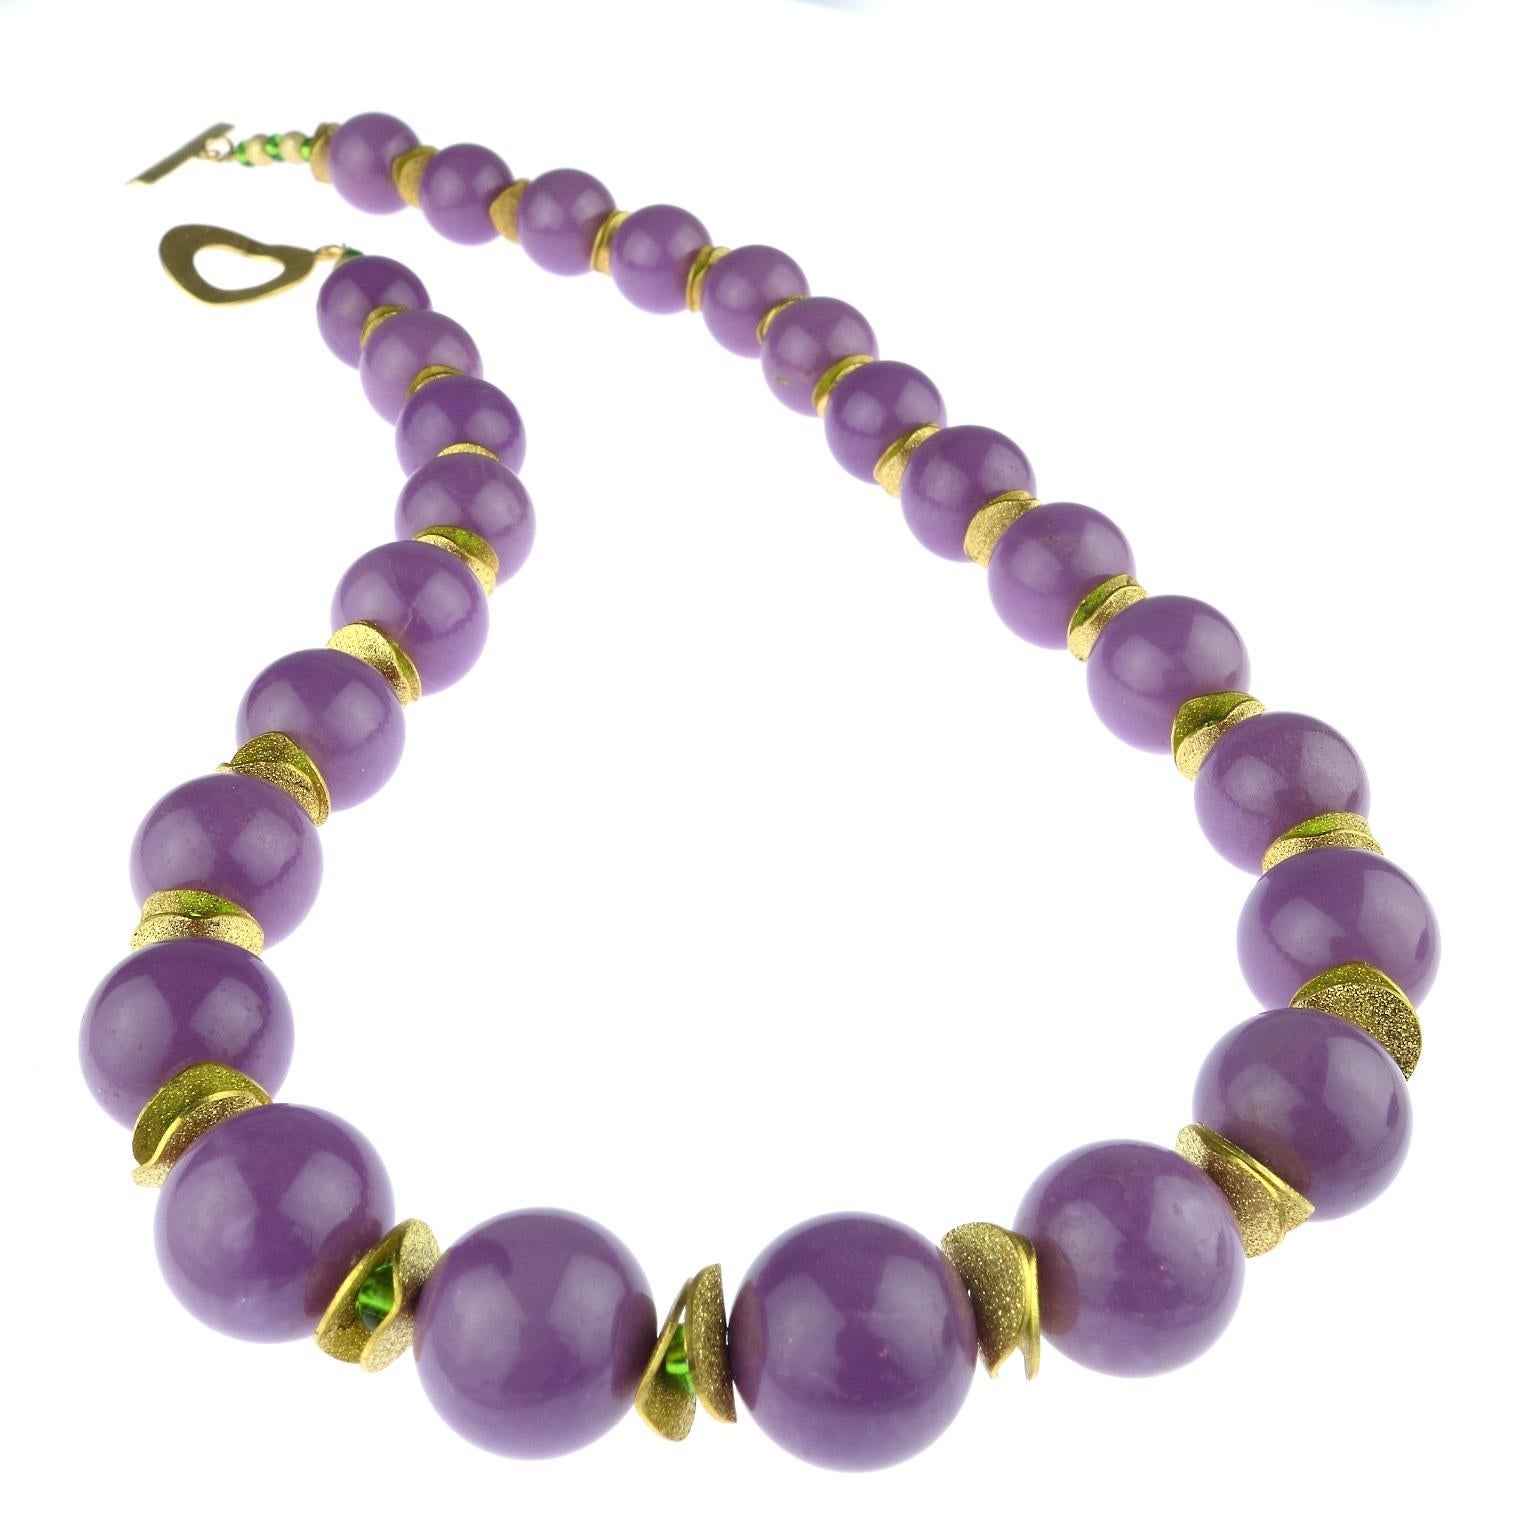 Phosphosiderite, 15 MM spheres of this gorgeous gemstone in a custom made necklace.  These mauvy beads are combined with gold tone flutters and bright green Czech beads in this one of a kind necklace.  This unique 23.5 inch necklace is finished with